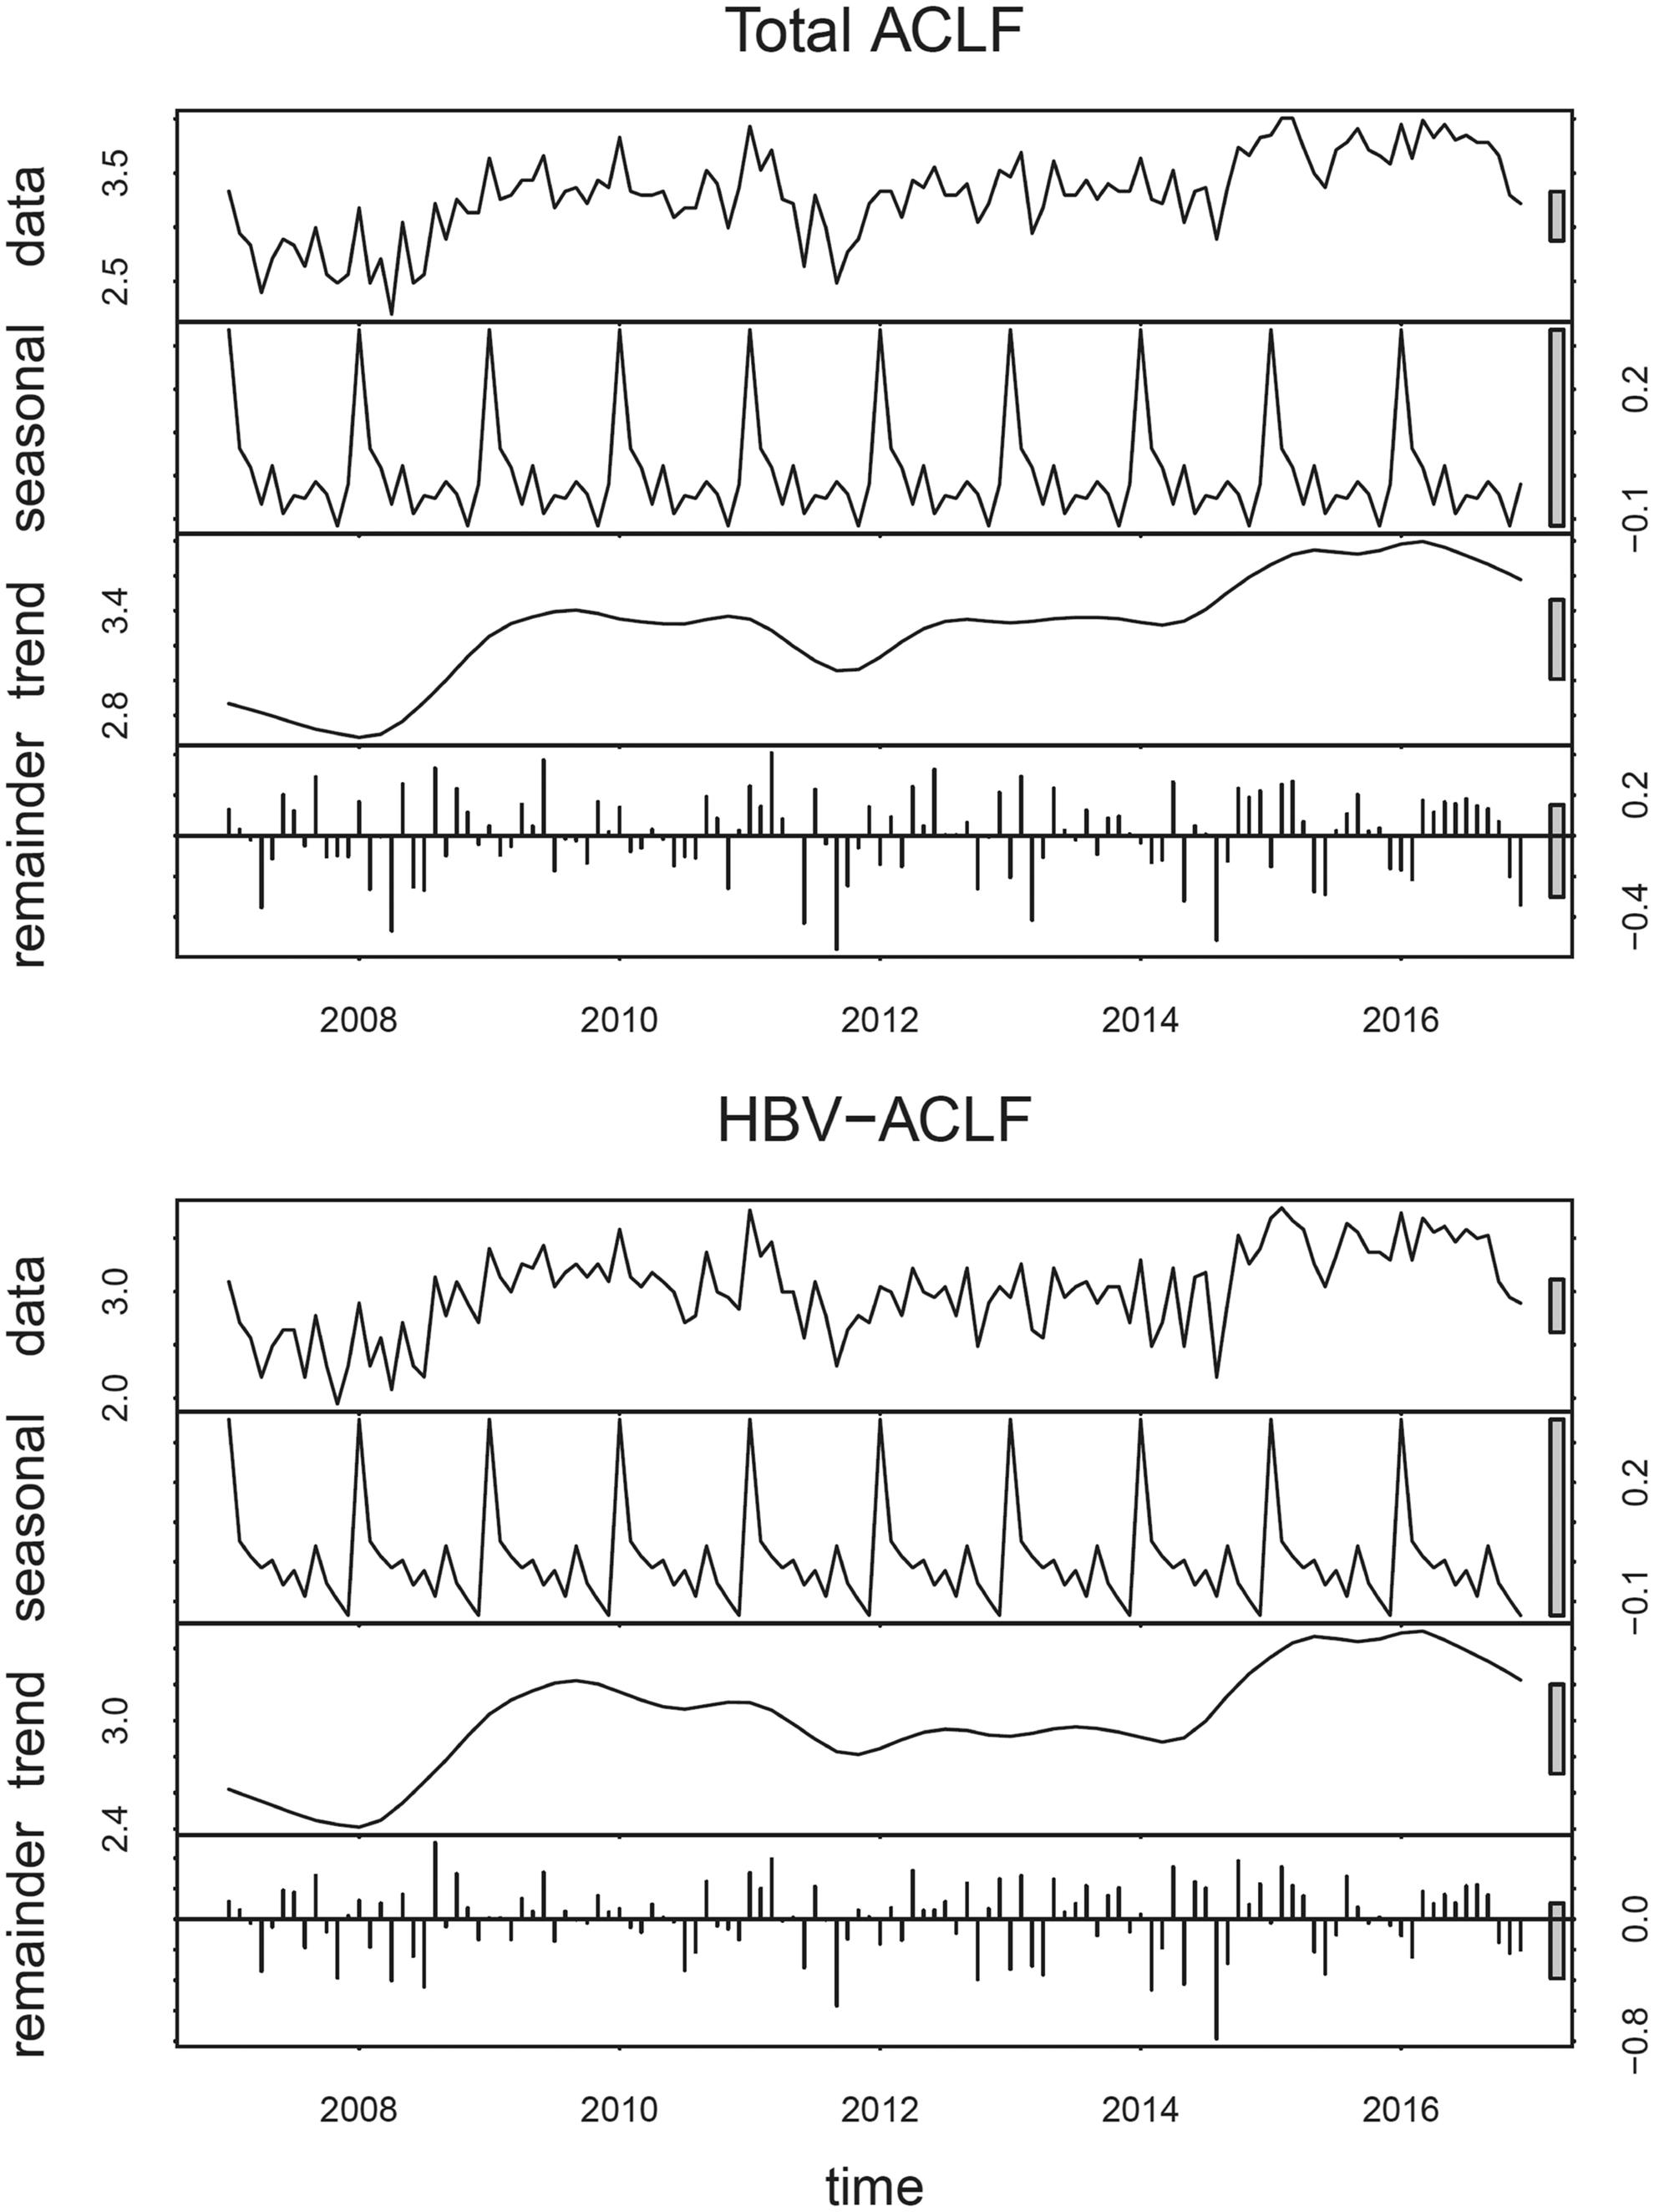 The seasonal variations of ACLF over 10 years.